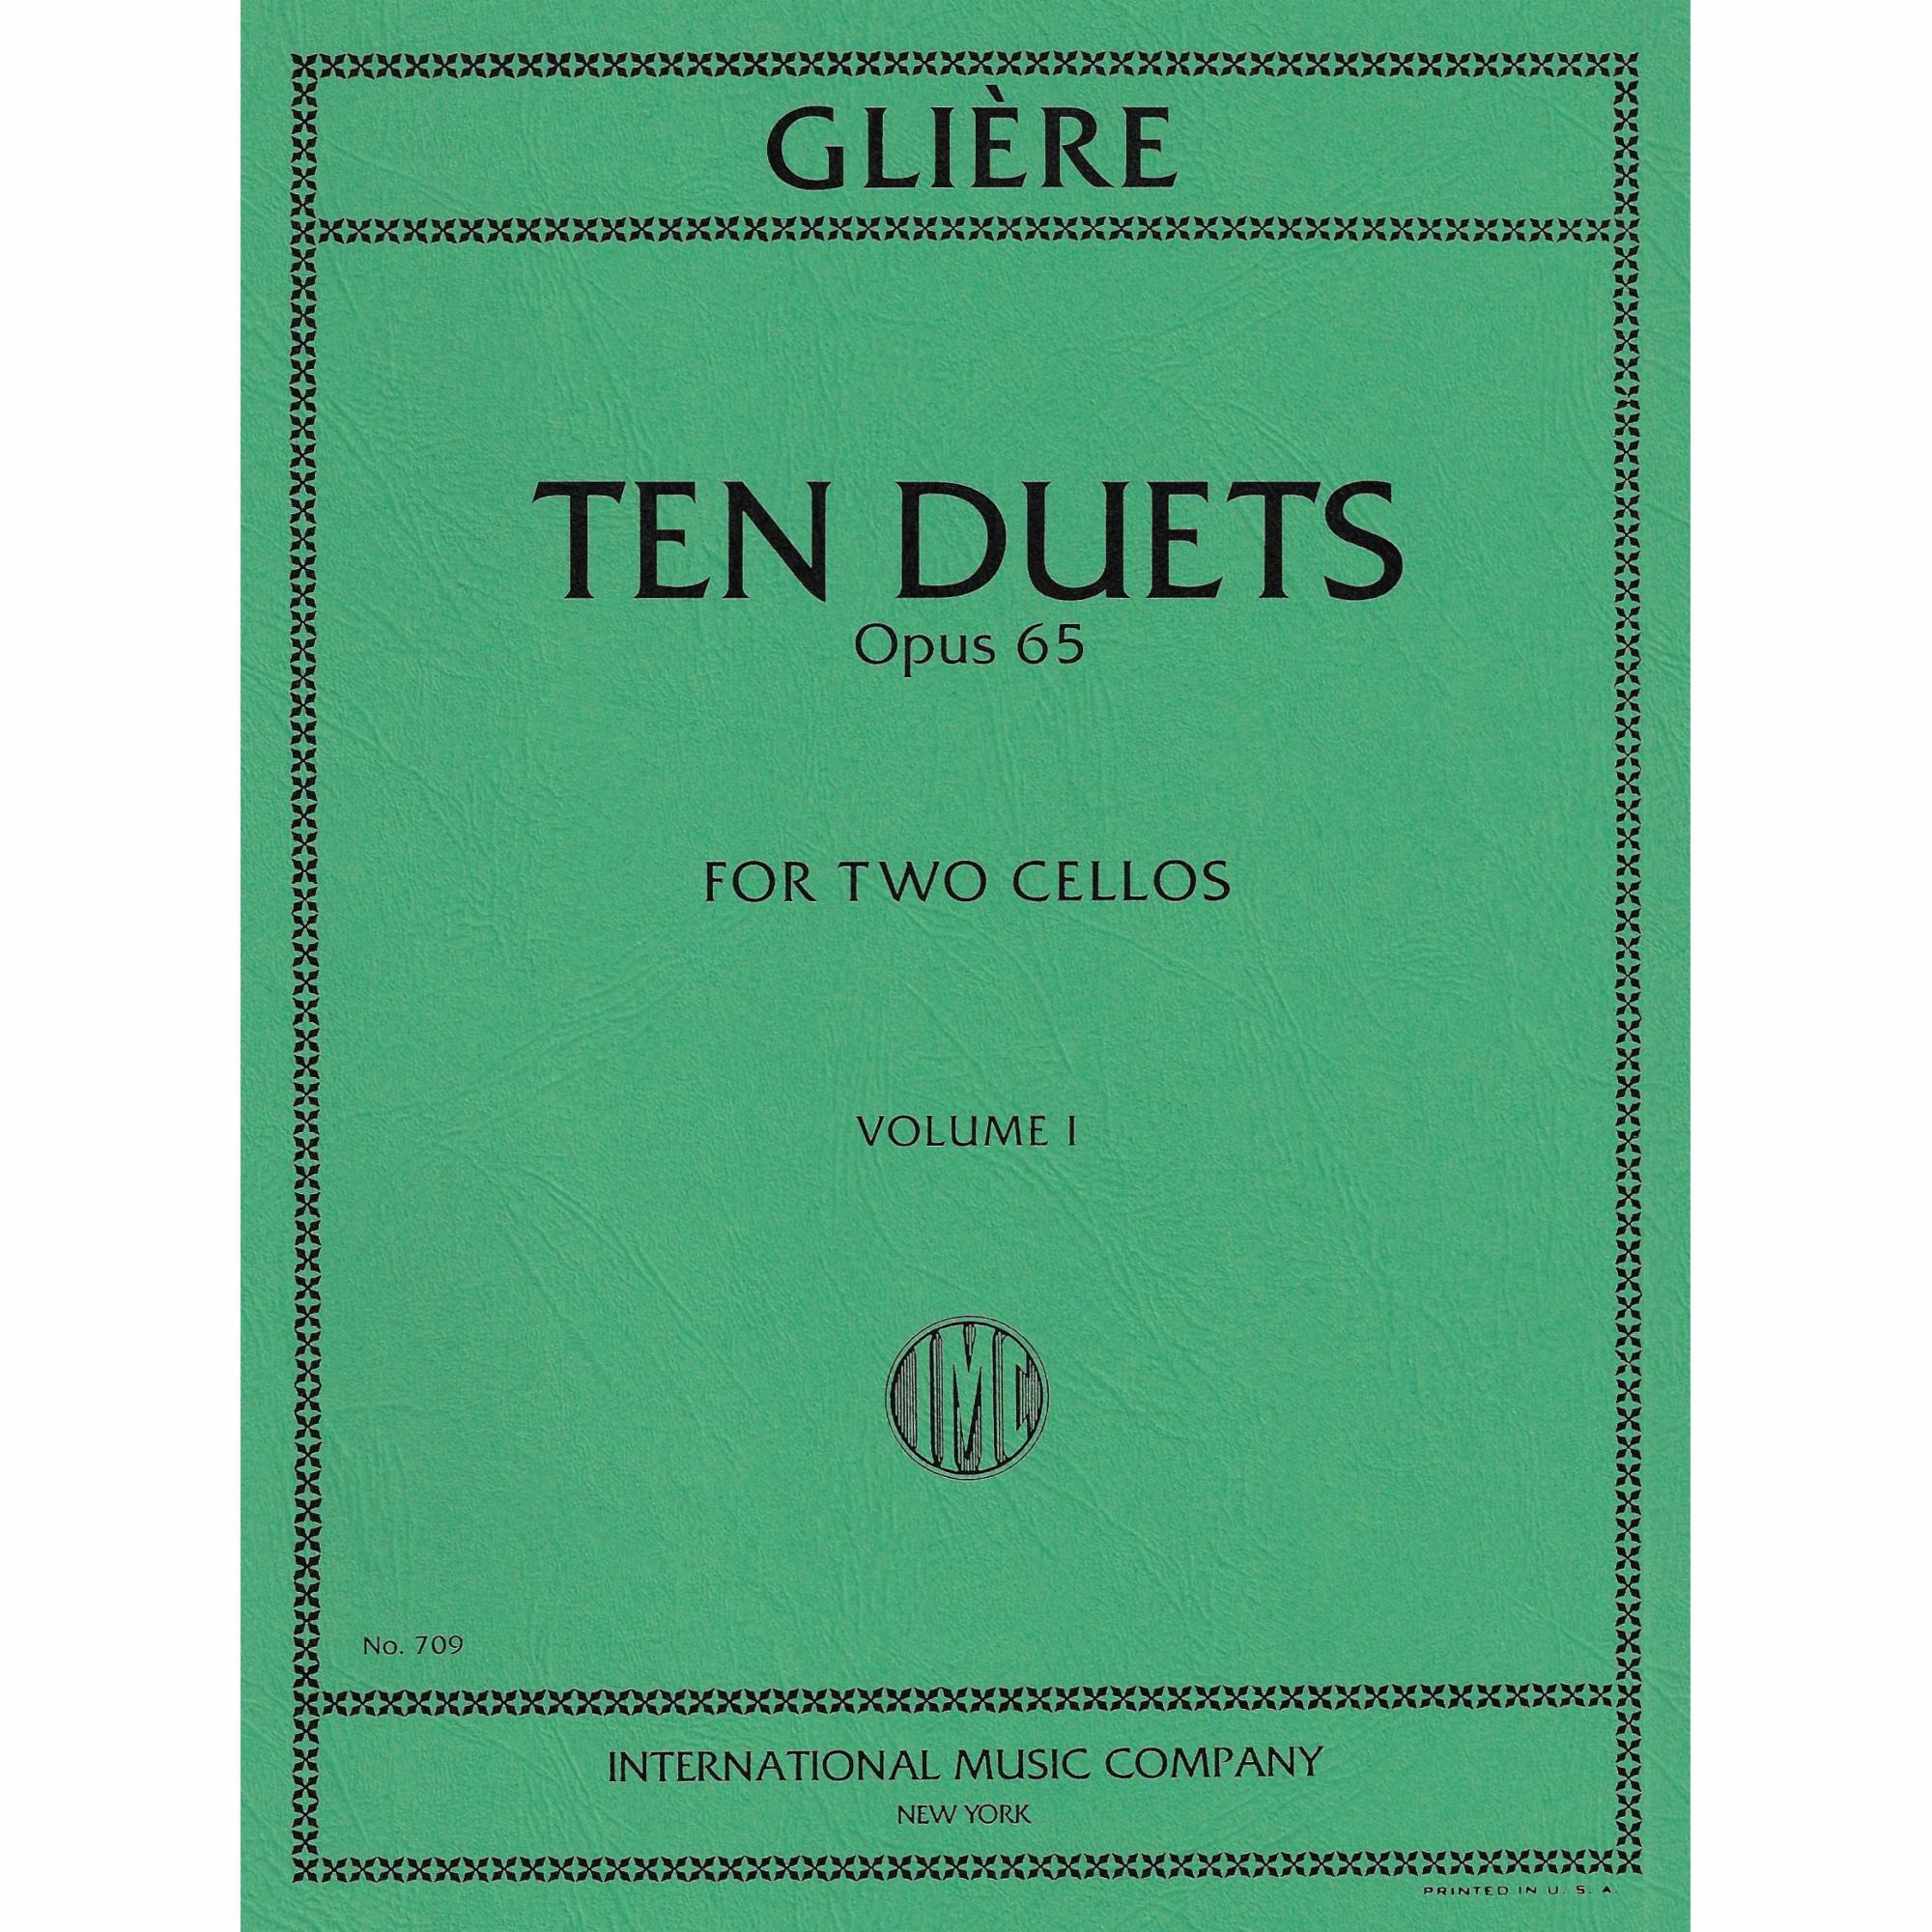 Gliere -- 10 Duets, Op. 53 for Two Cellos